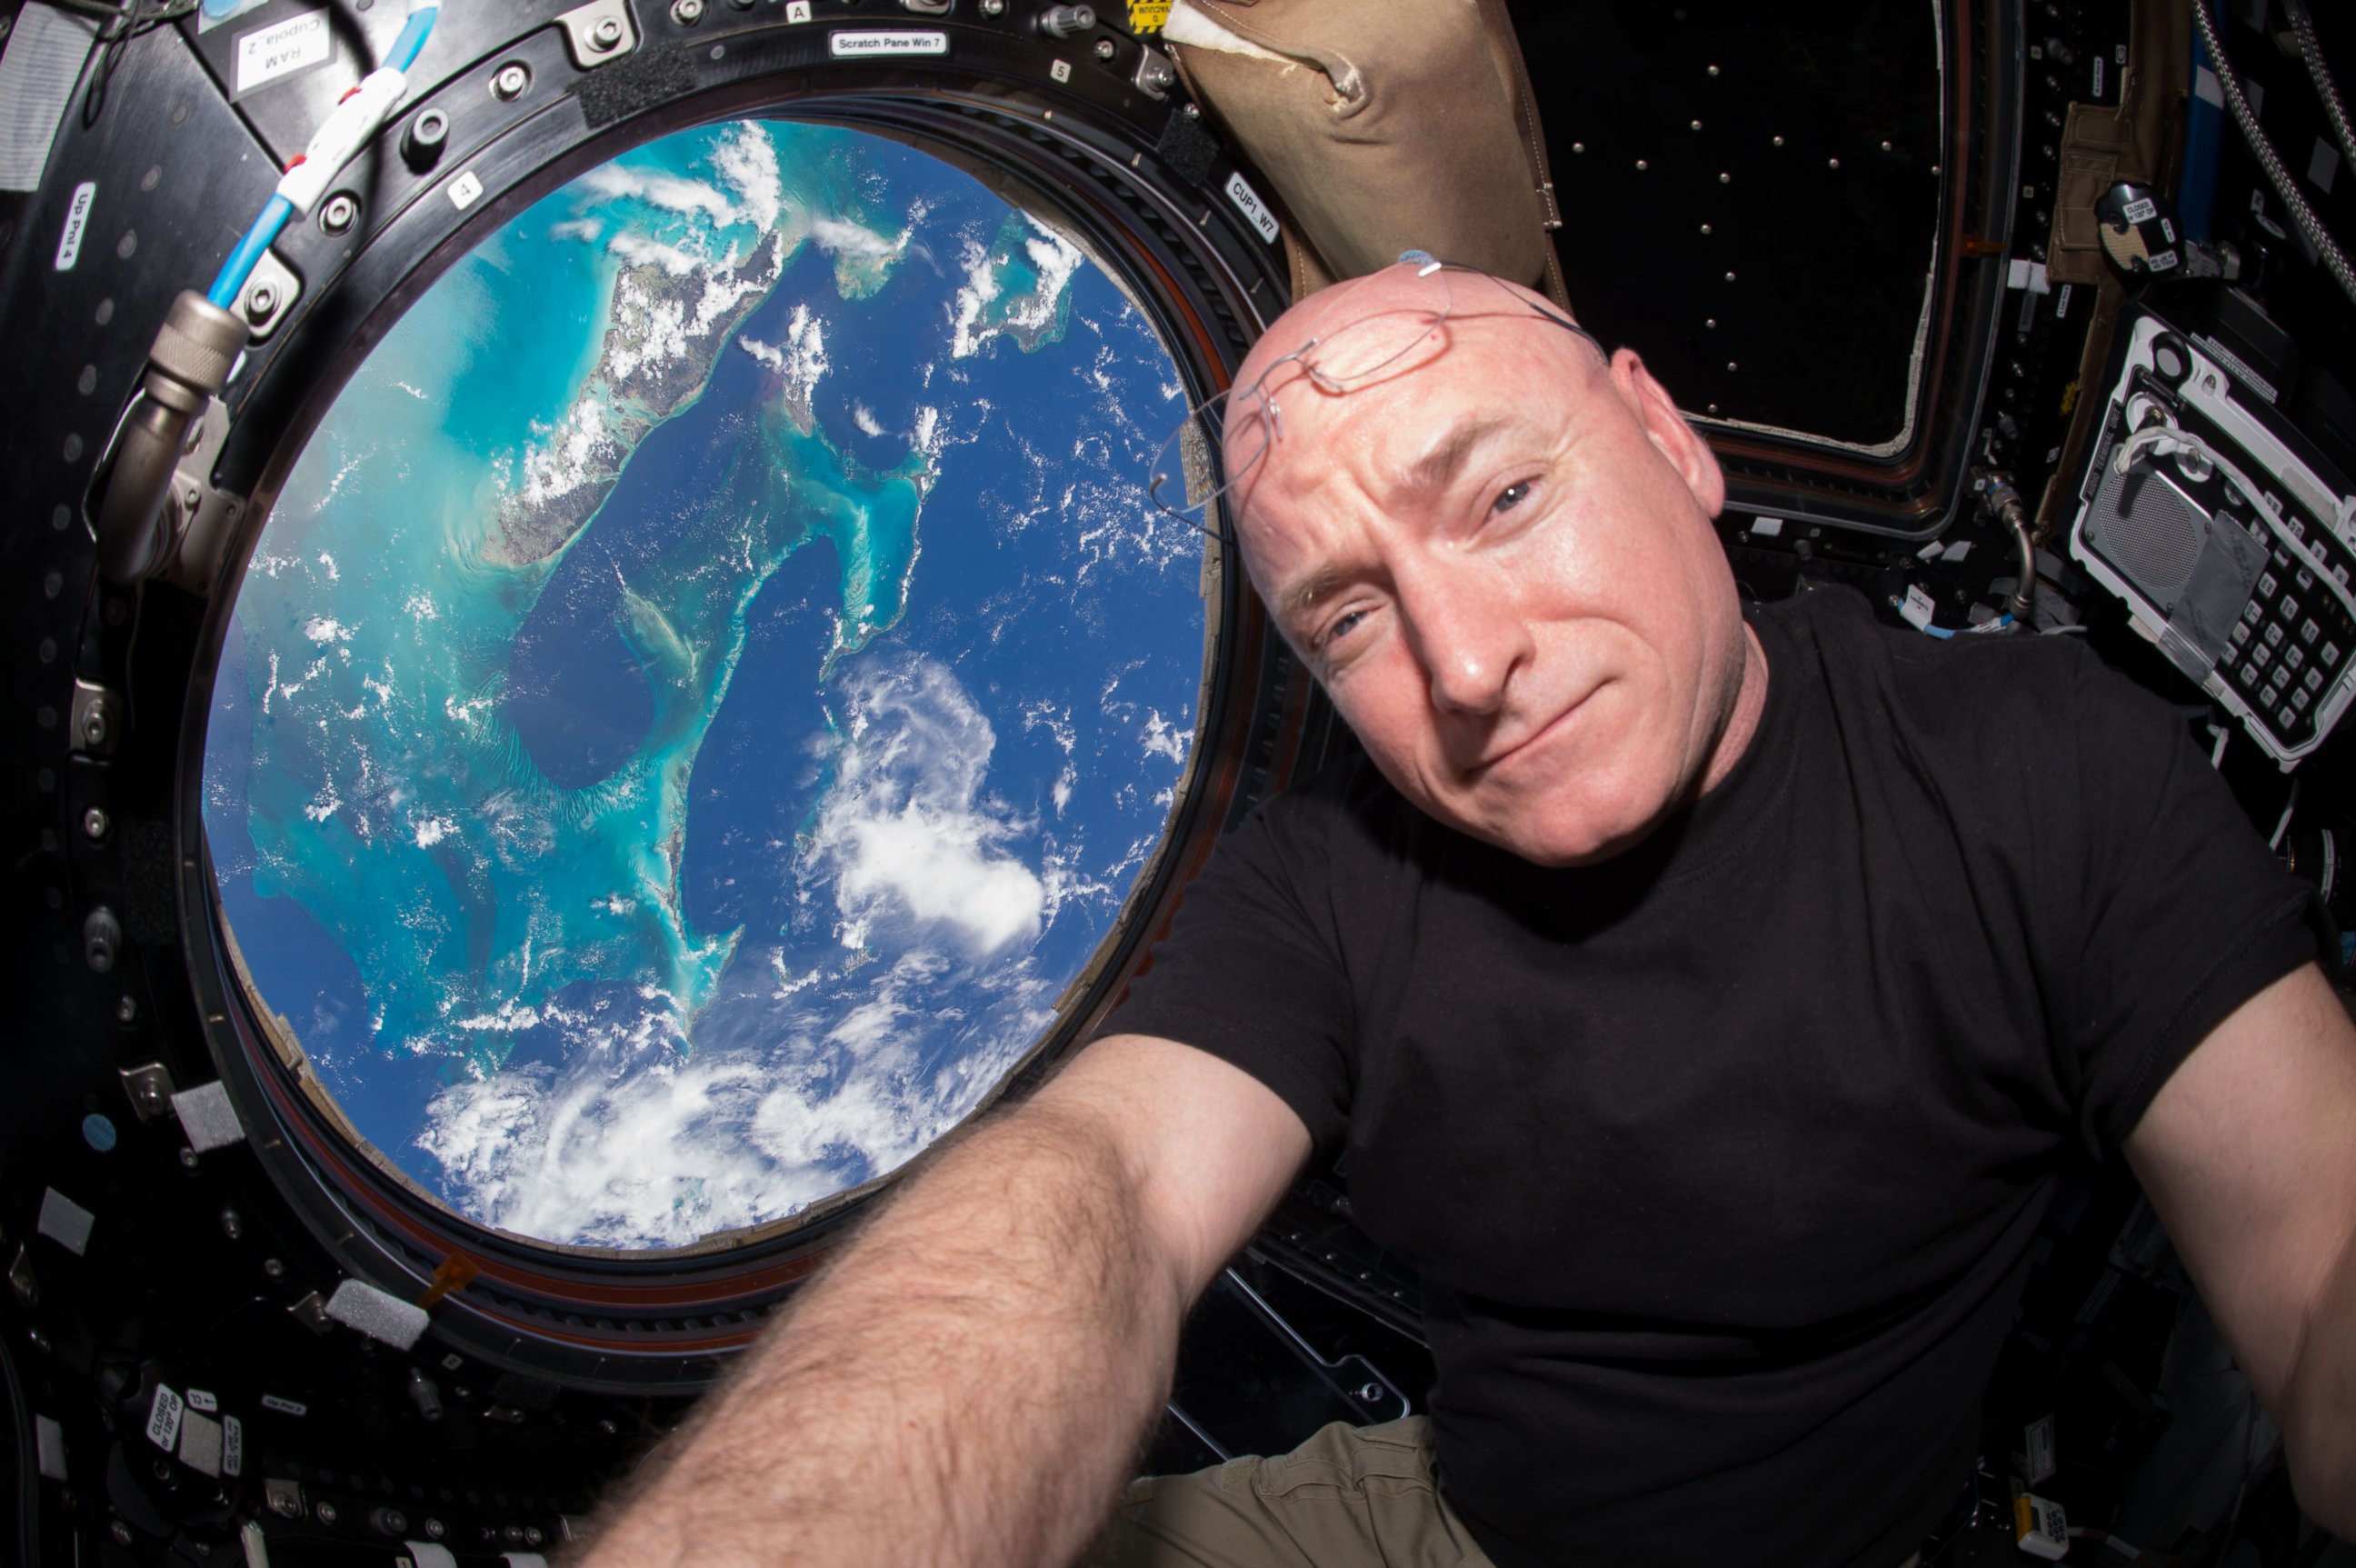 PHOTO: Scott Kelly is seen inside the Cupola, a special module which provides a 360-degree viewing of the Earth and the International Space Station, July 12, 2015.